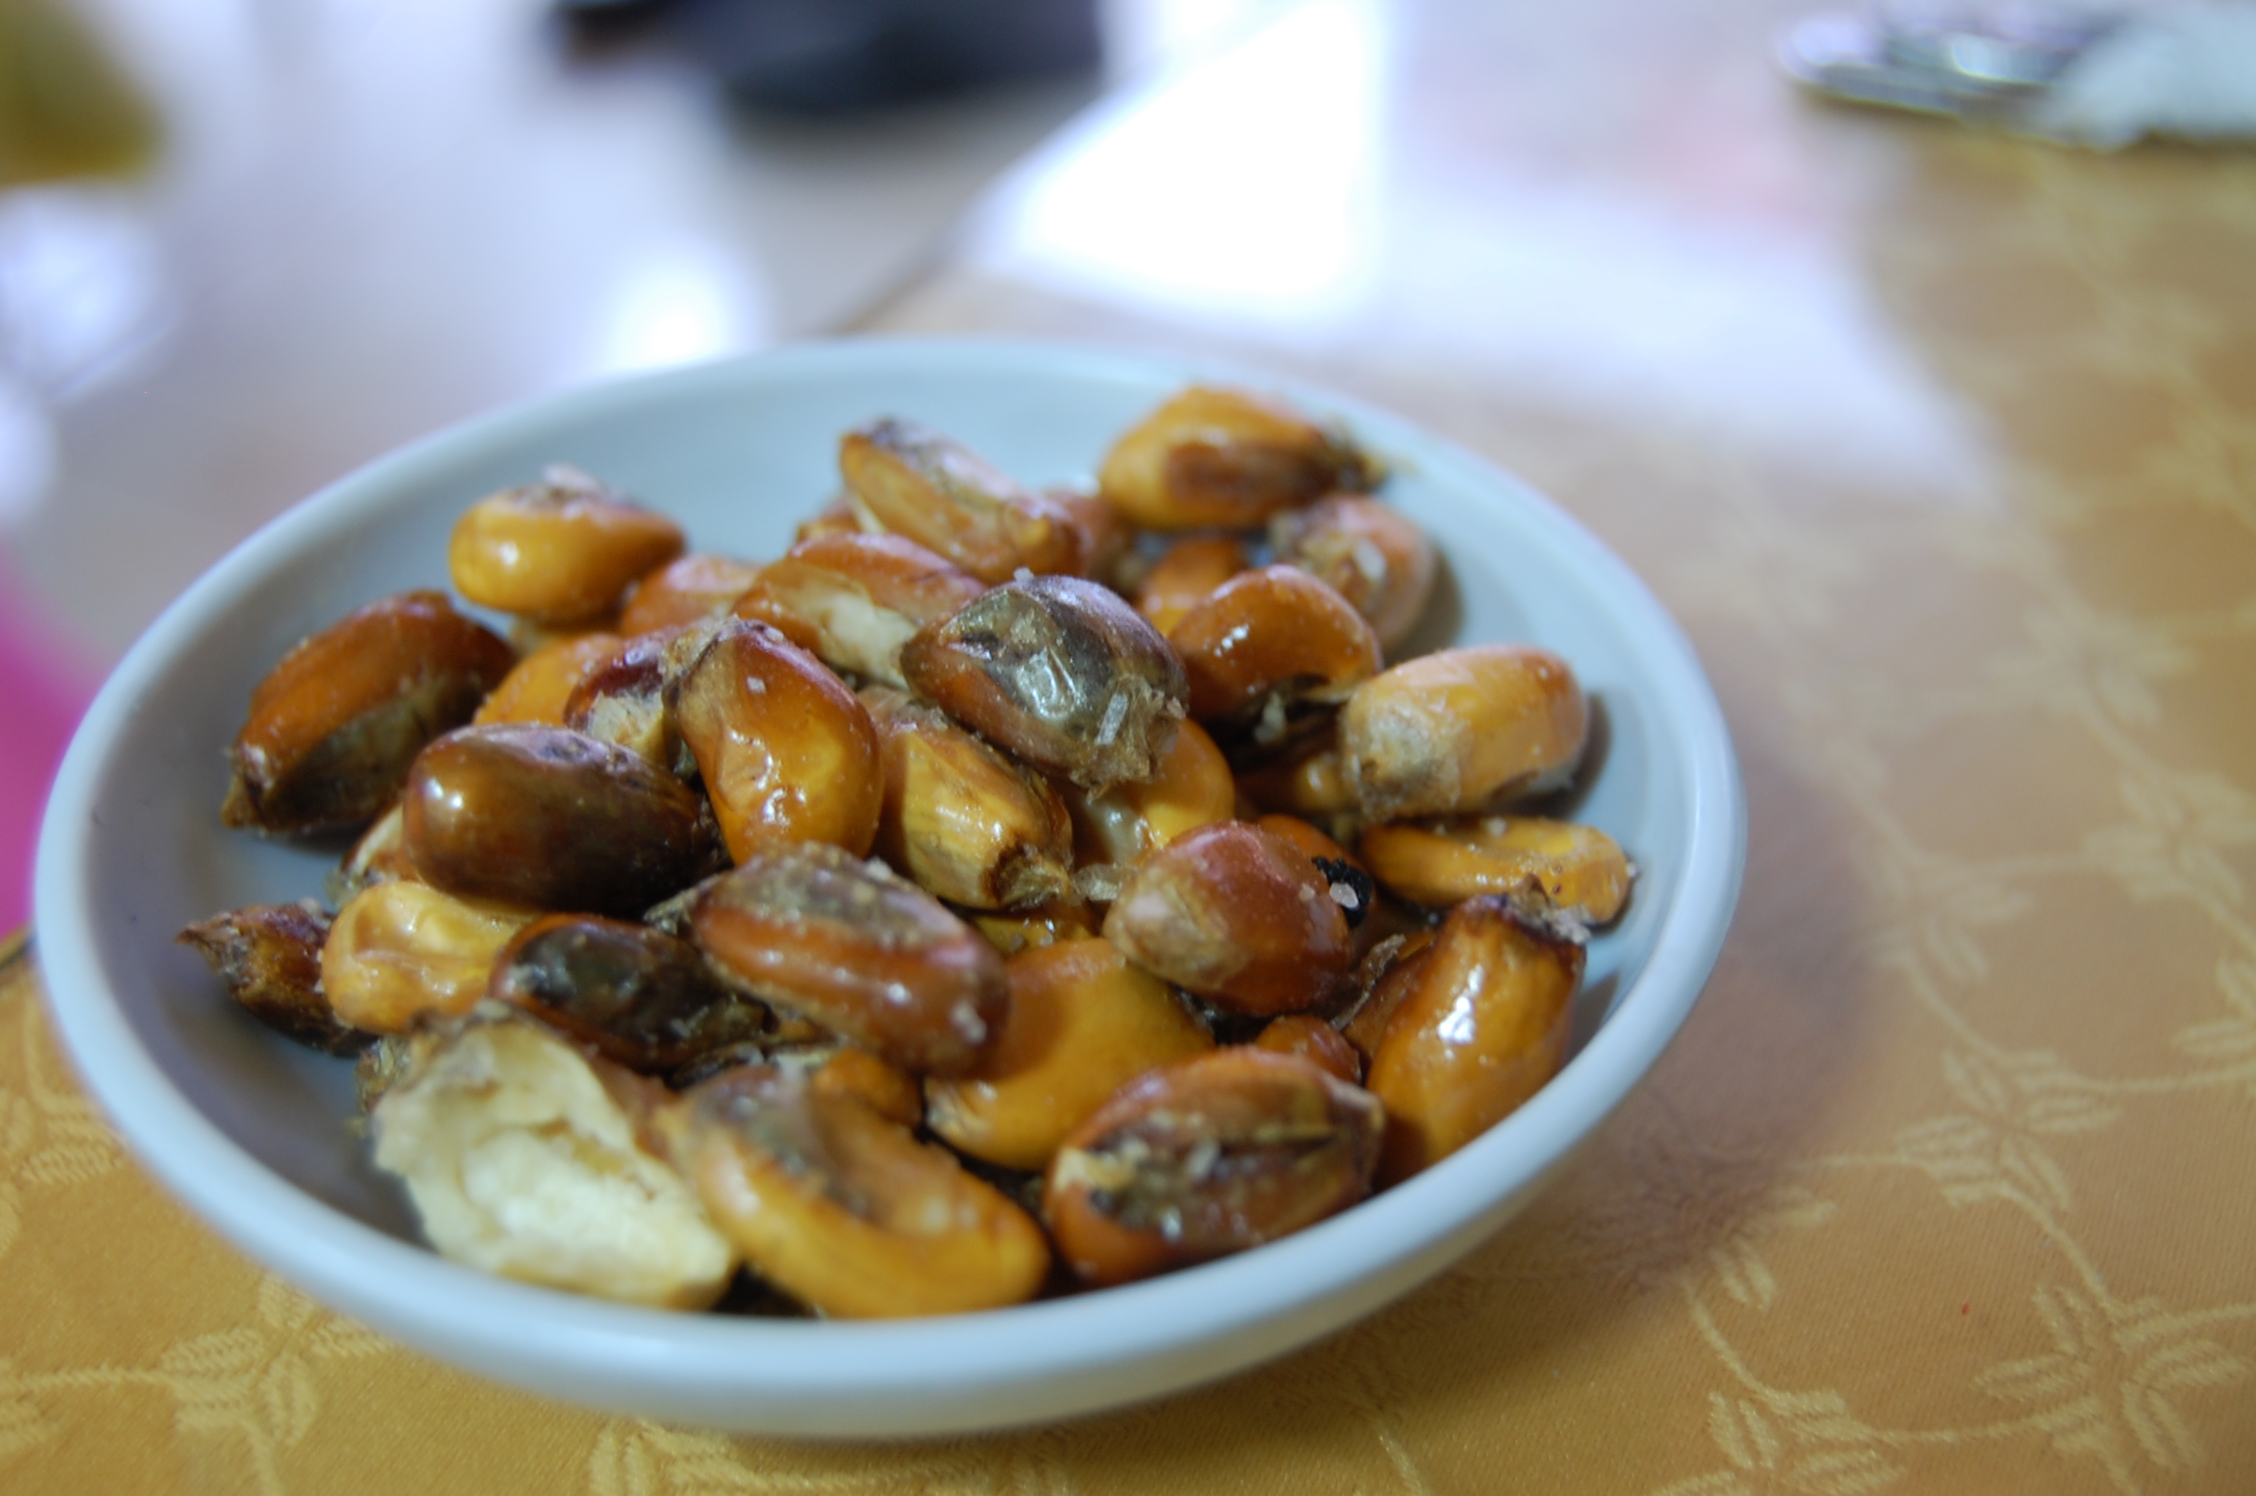 small plates filled with cooked bananas and nuts